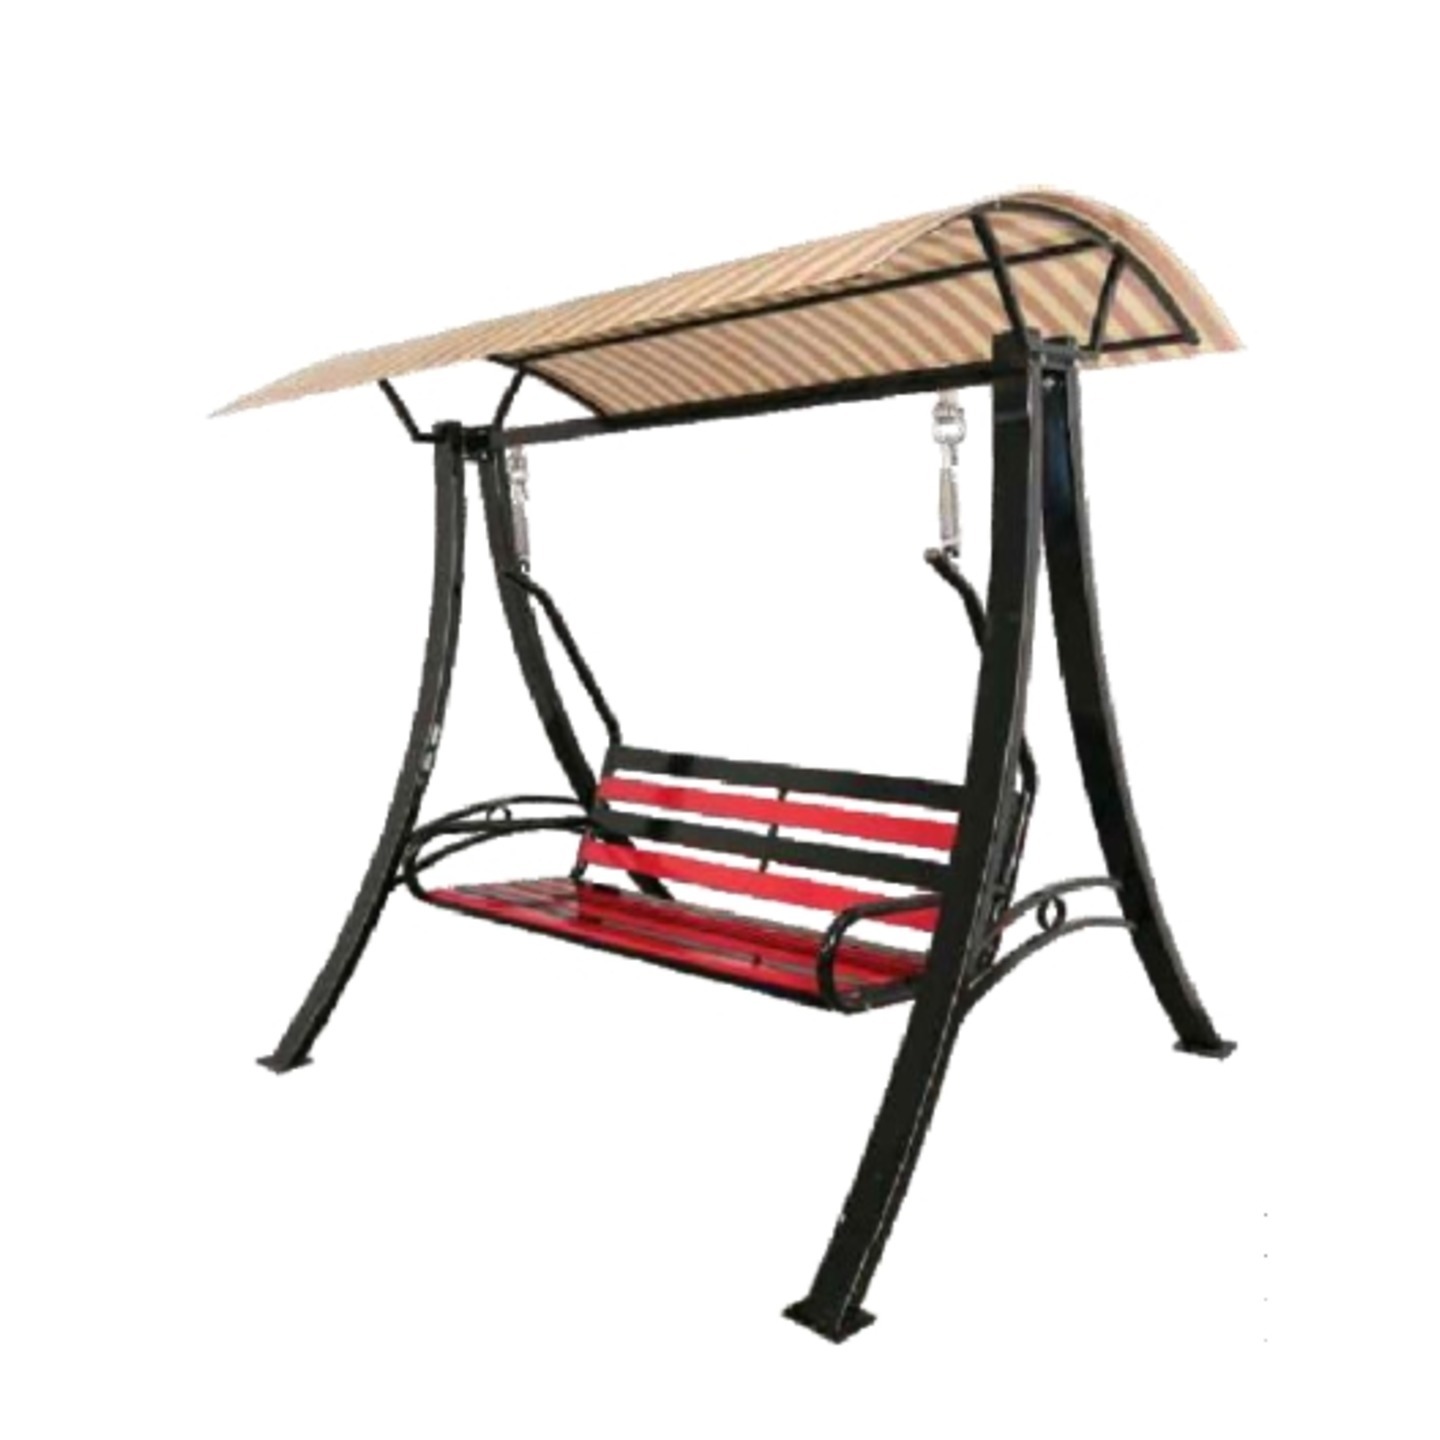 HJA Swing With Stand Roof HOJ-002 In Red & Black Colour